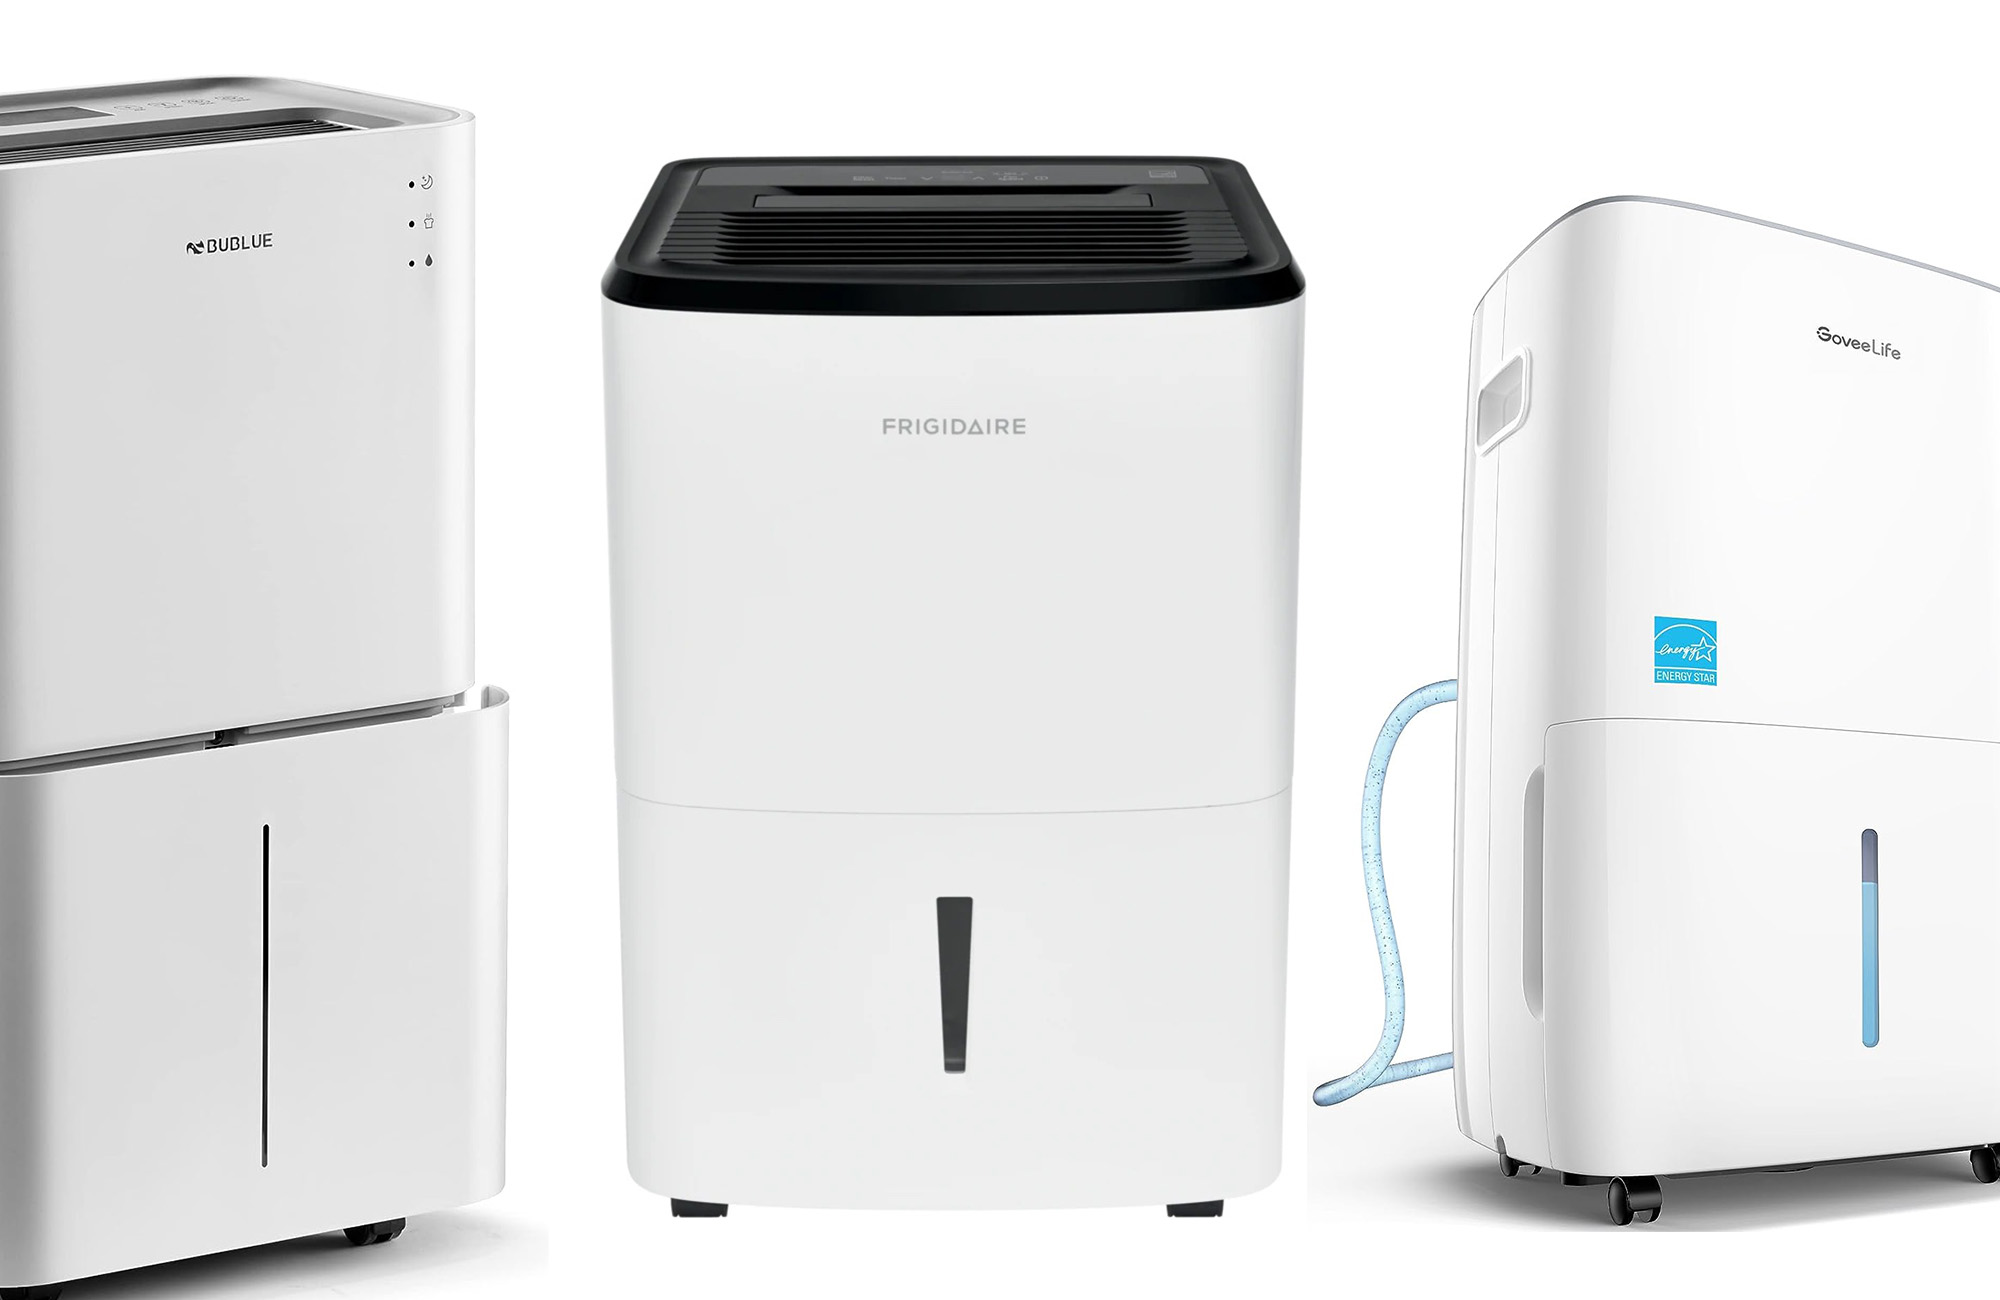 These dehumidifiers zap moisture from your muggy basement - CNET